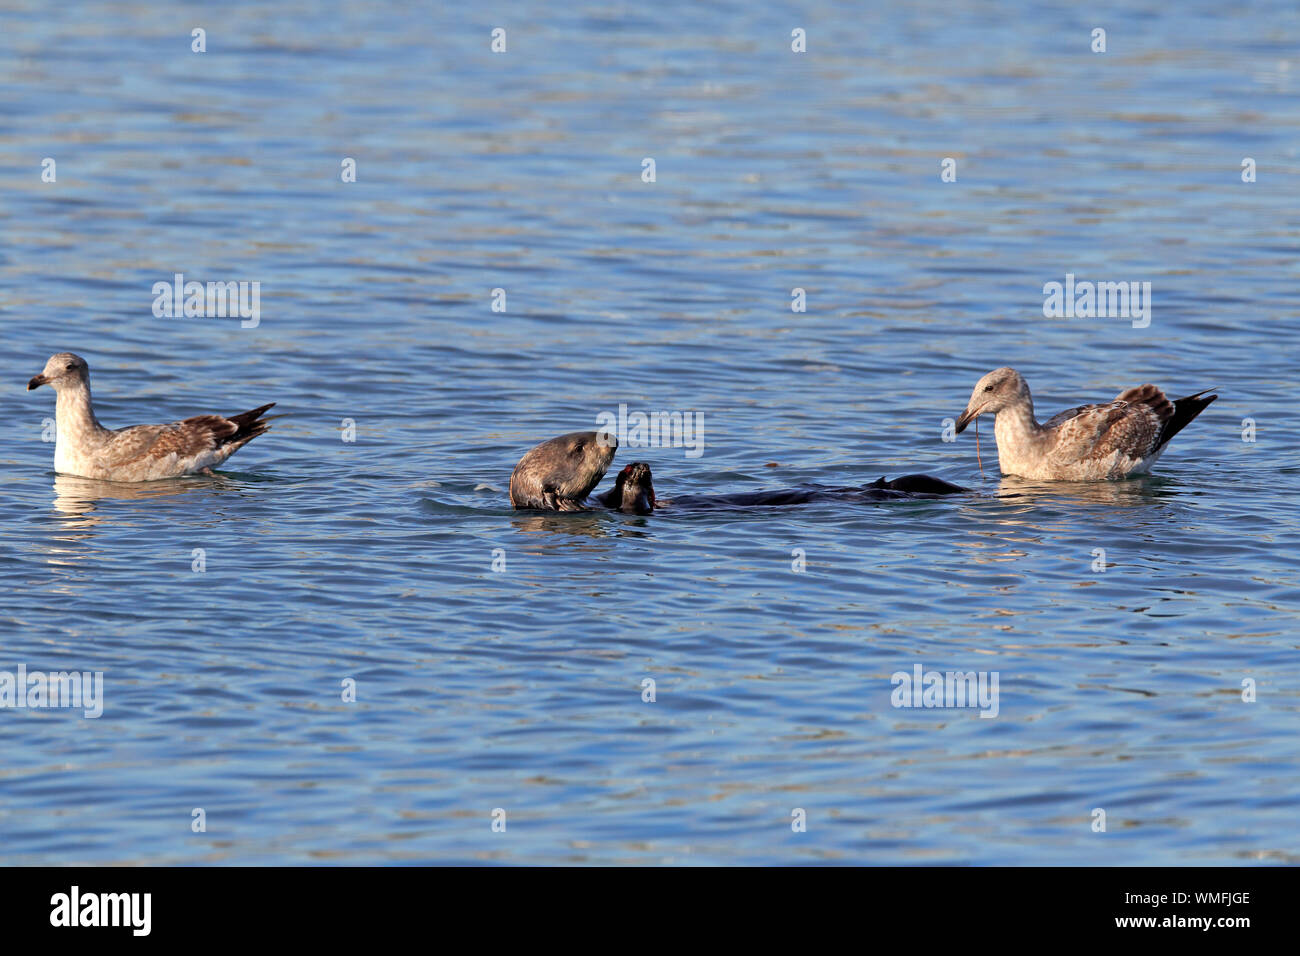 Sea Otter, adult with Western Gull in non breeding plumage, Elkhorn Slough, Monterey, California, USA, (Enhydra lutris), (Larus occidentalis) Stock Photo